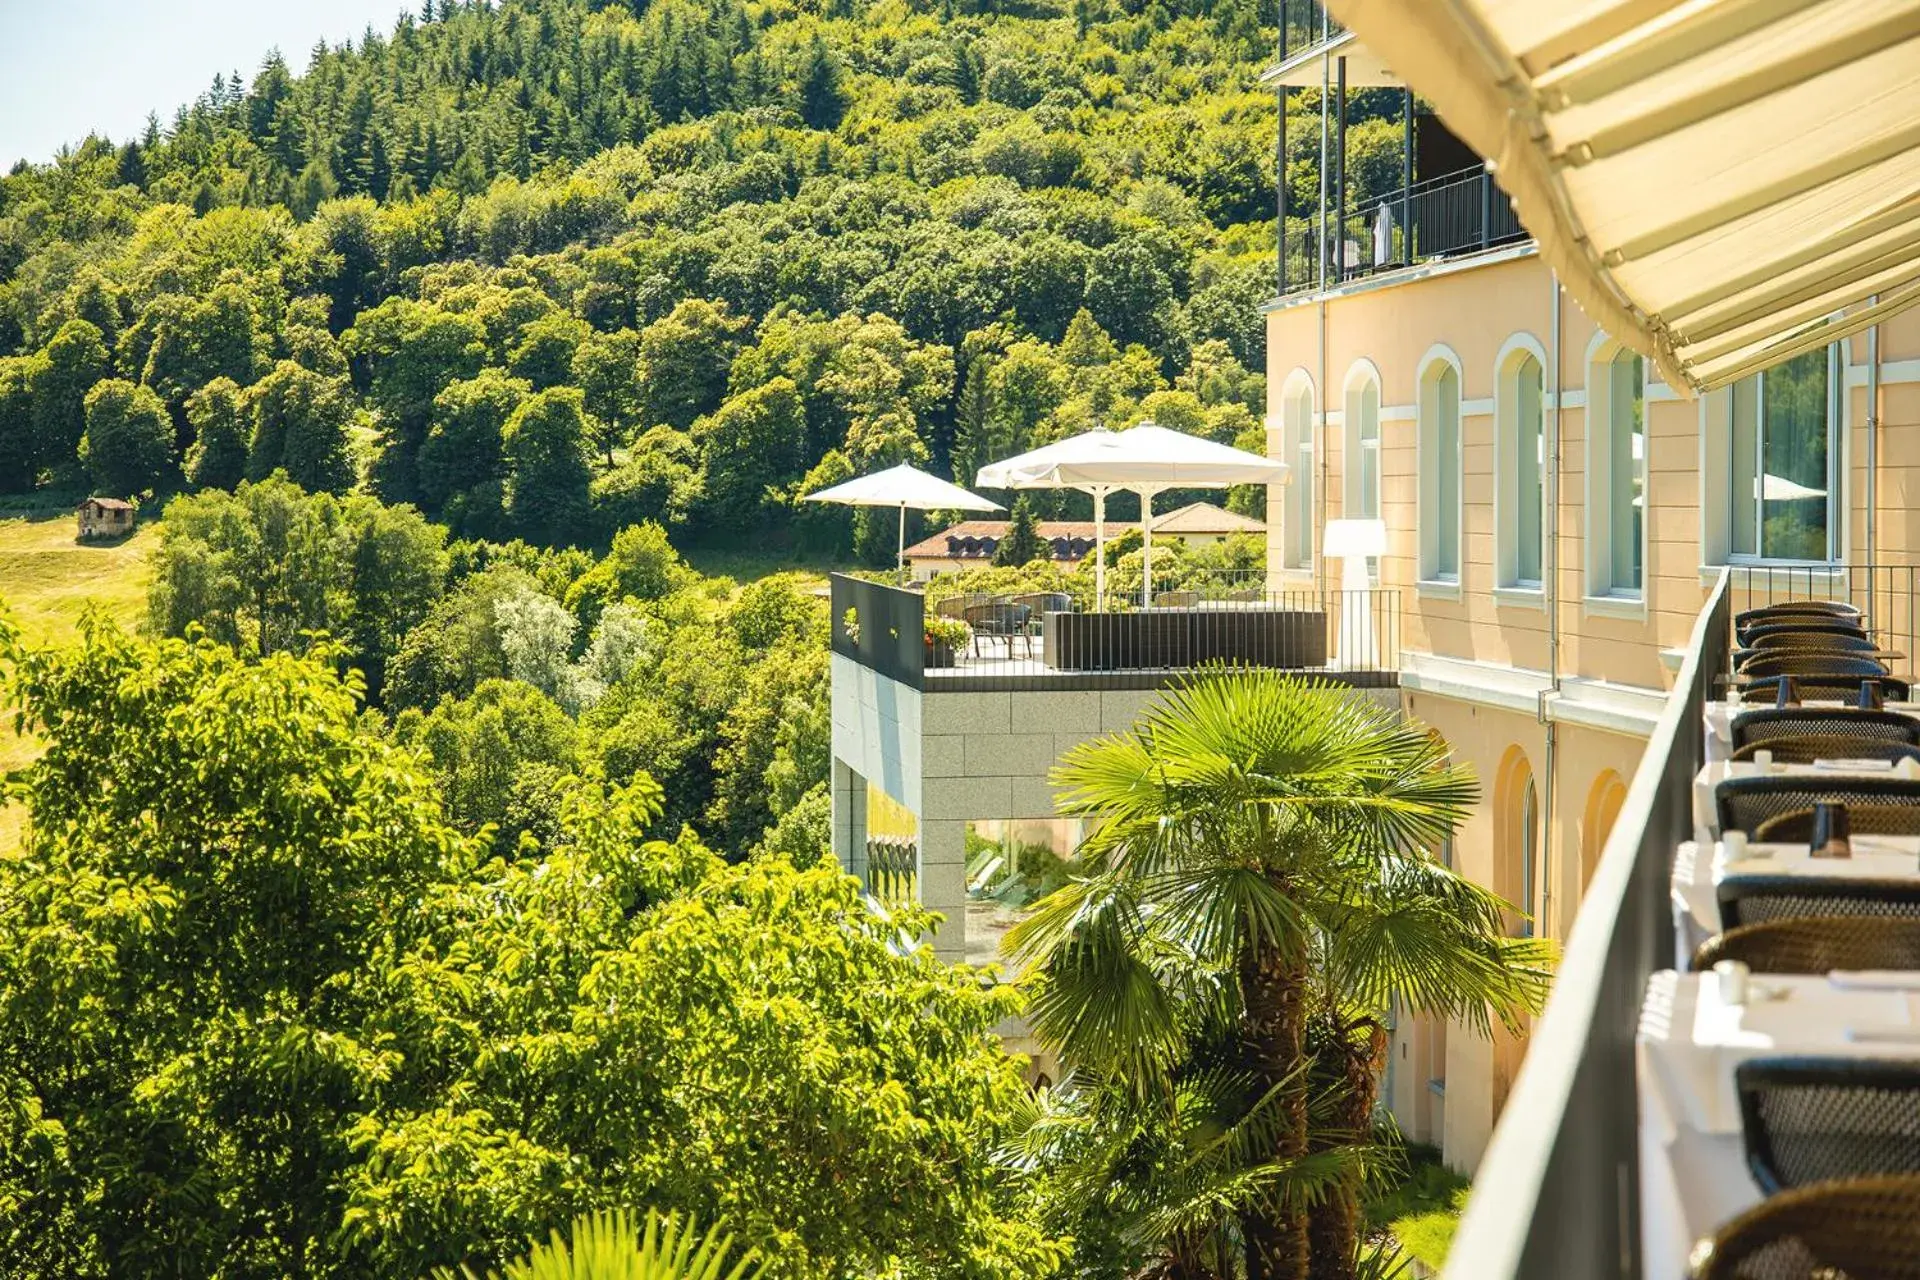 View (from property/room) in Kurhaus Cademario Hotel & DOT Spa - Ticino Hotels Group